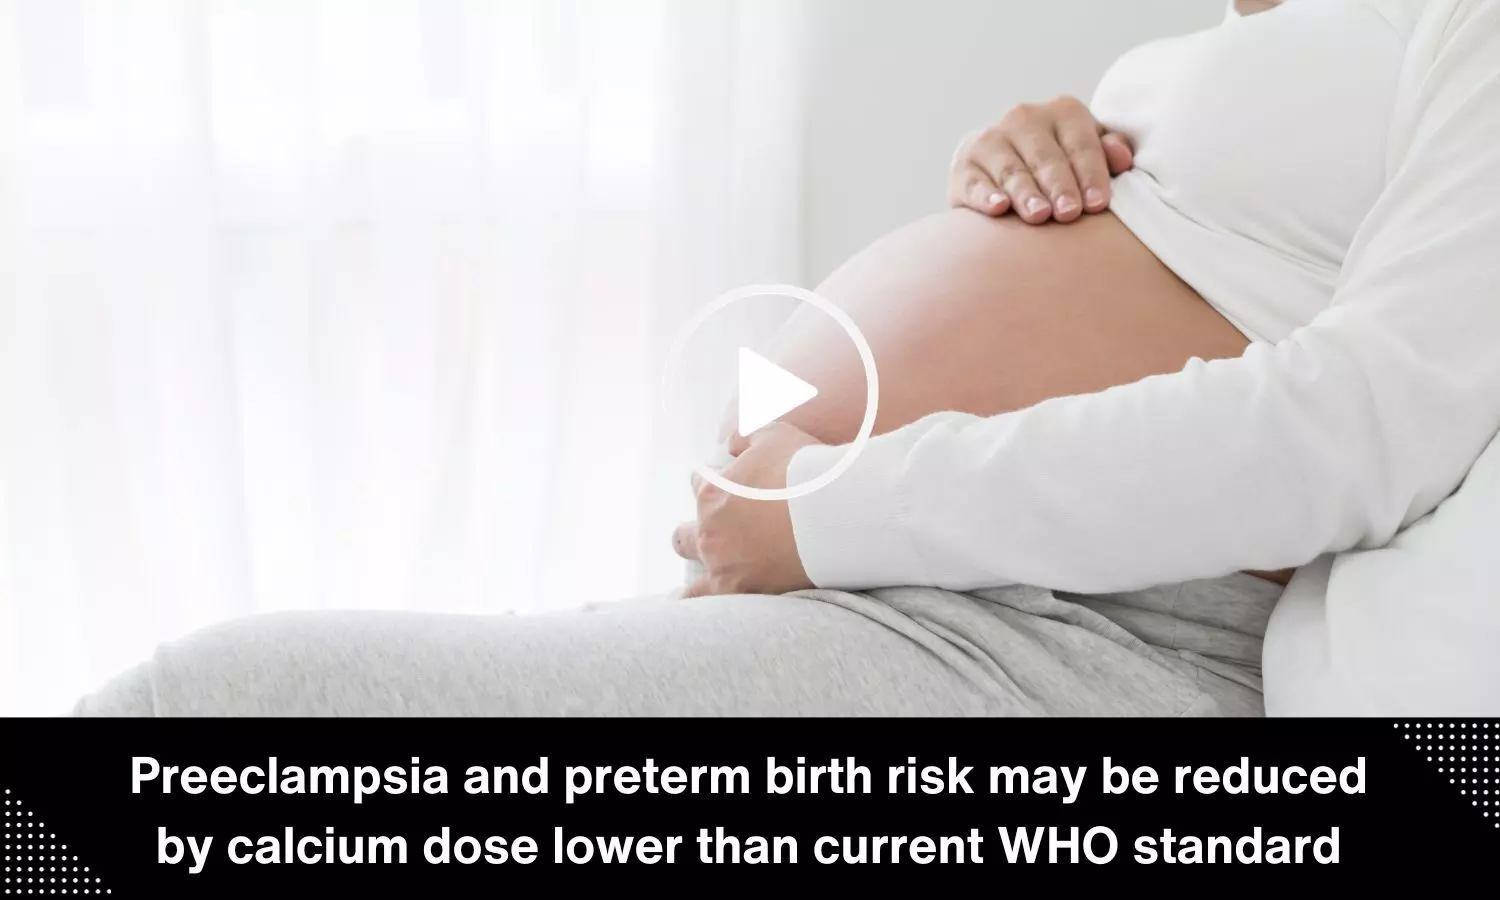 Preeclampsia and preterm birth risk may be reduced by calcium dose lower than current WHO standard